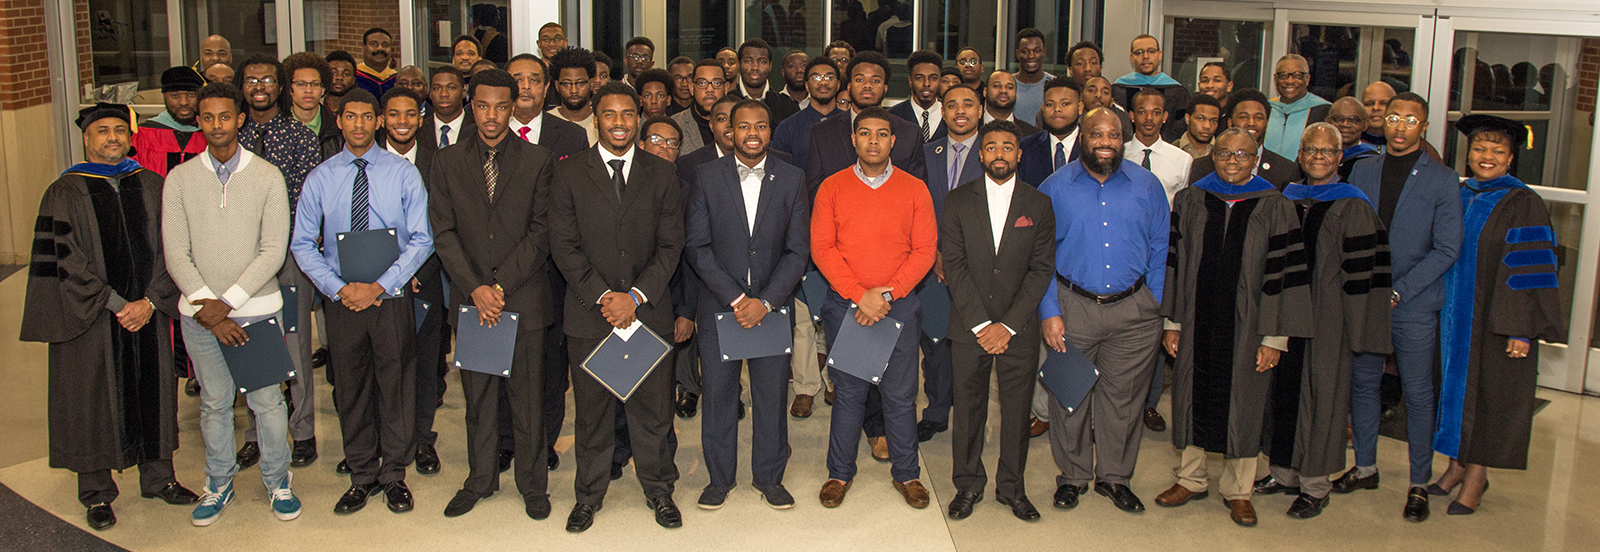 African American Male Academy